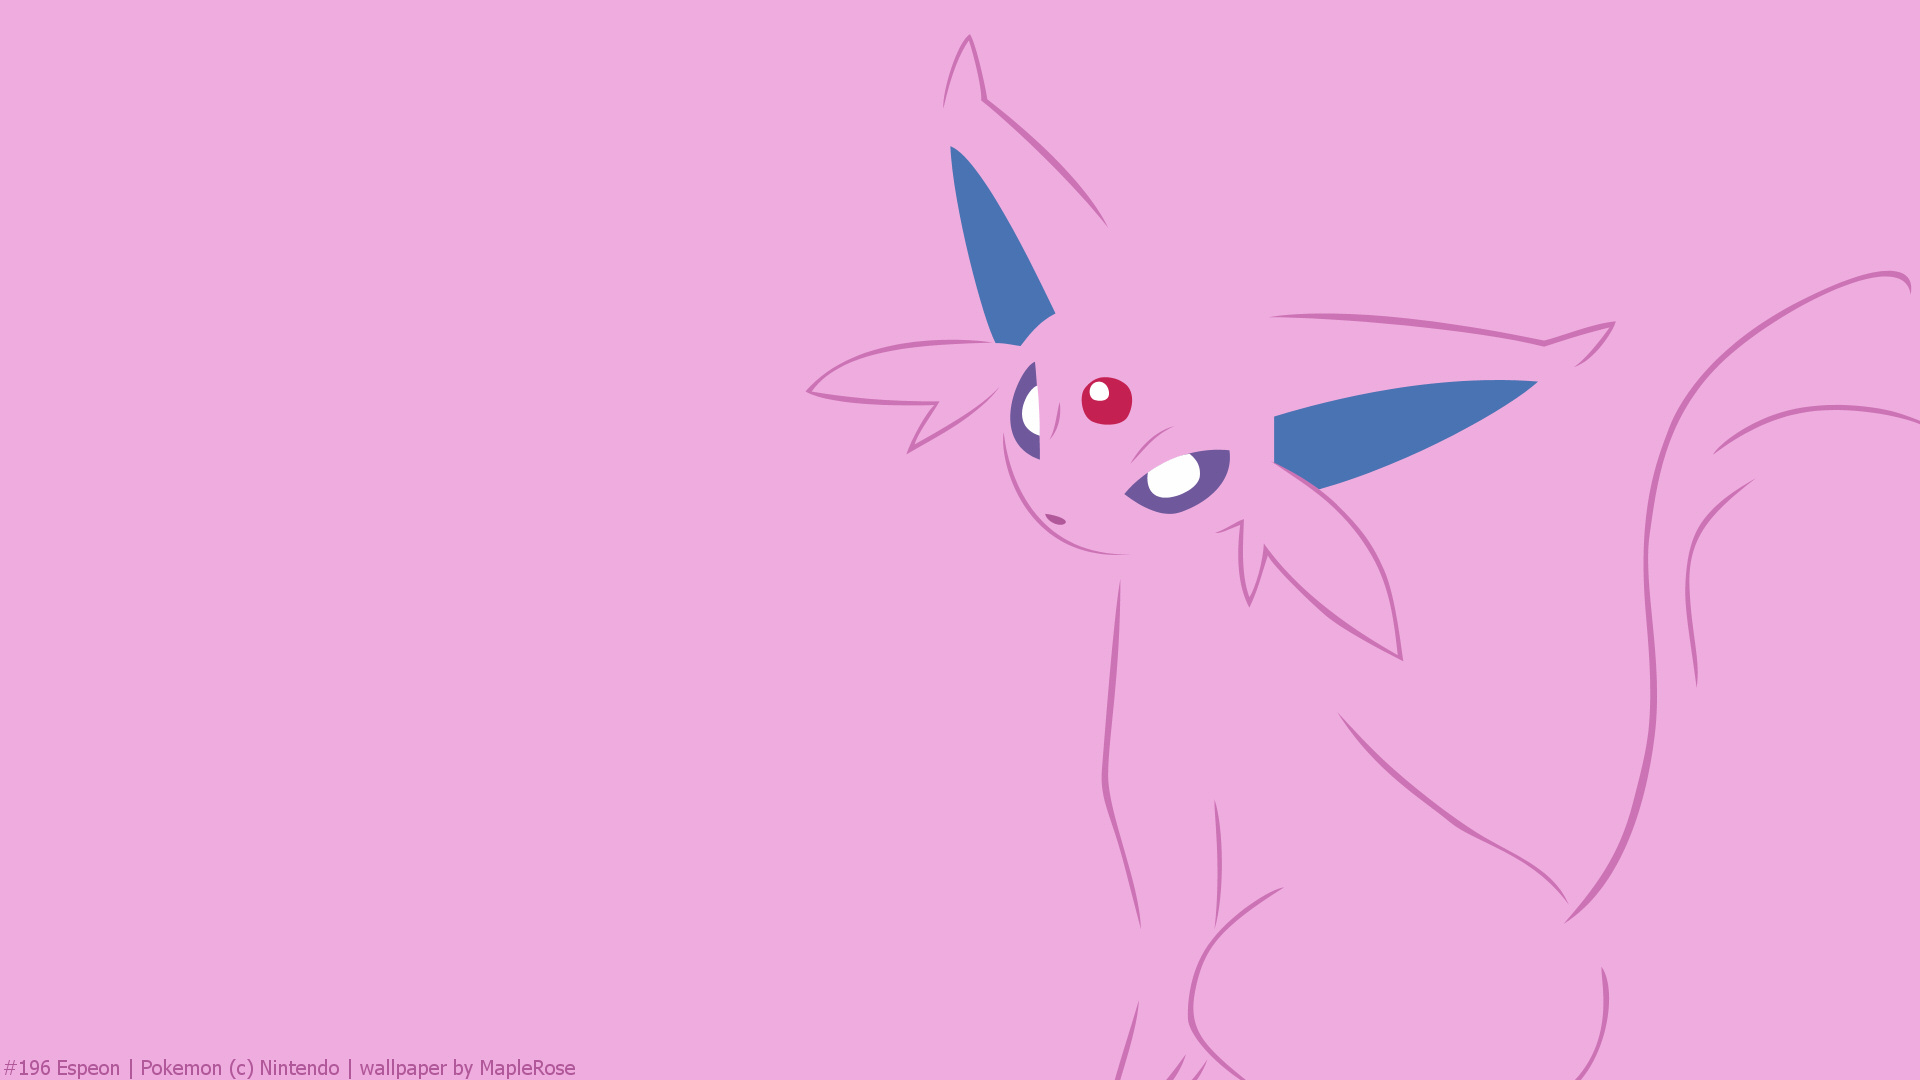 Espeon (Pokémon) HD Wallpapers and Backgrounds. 